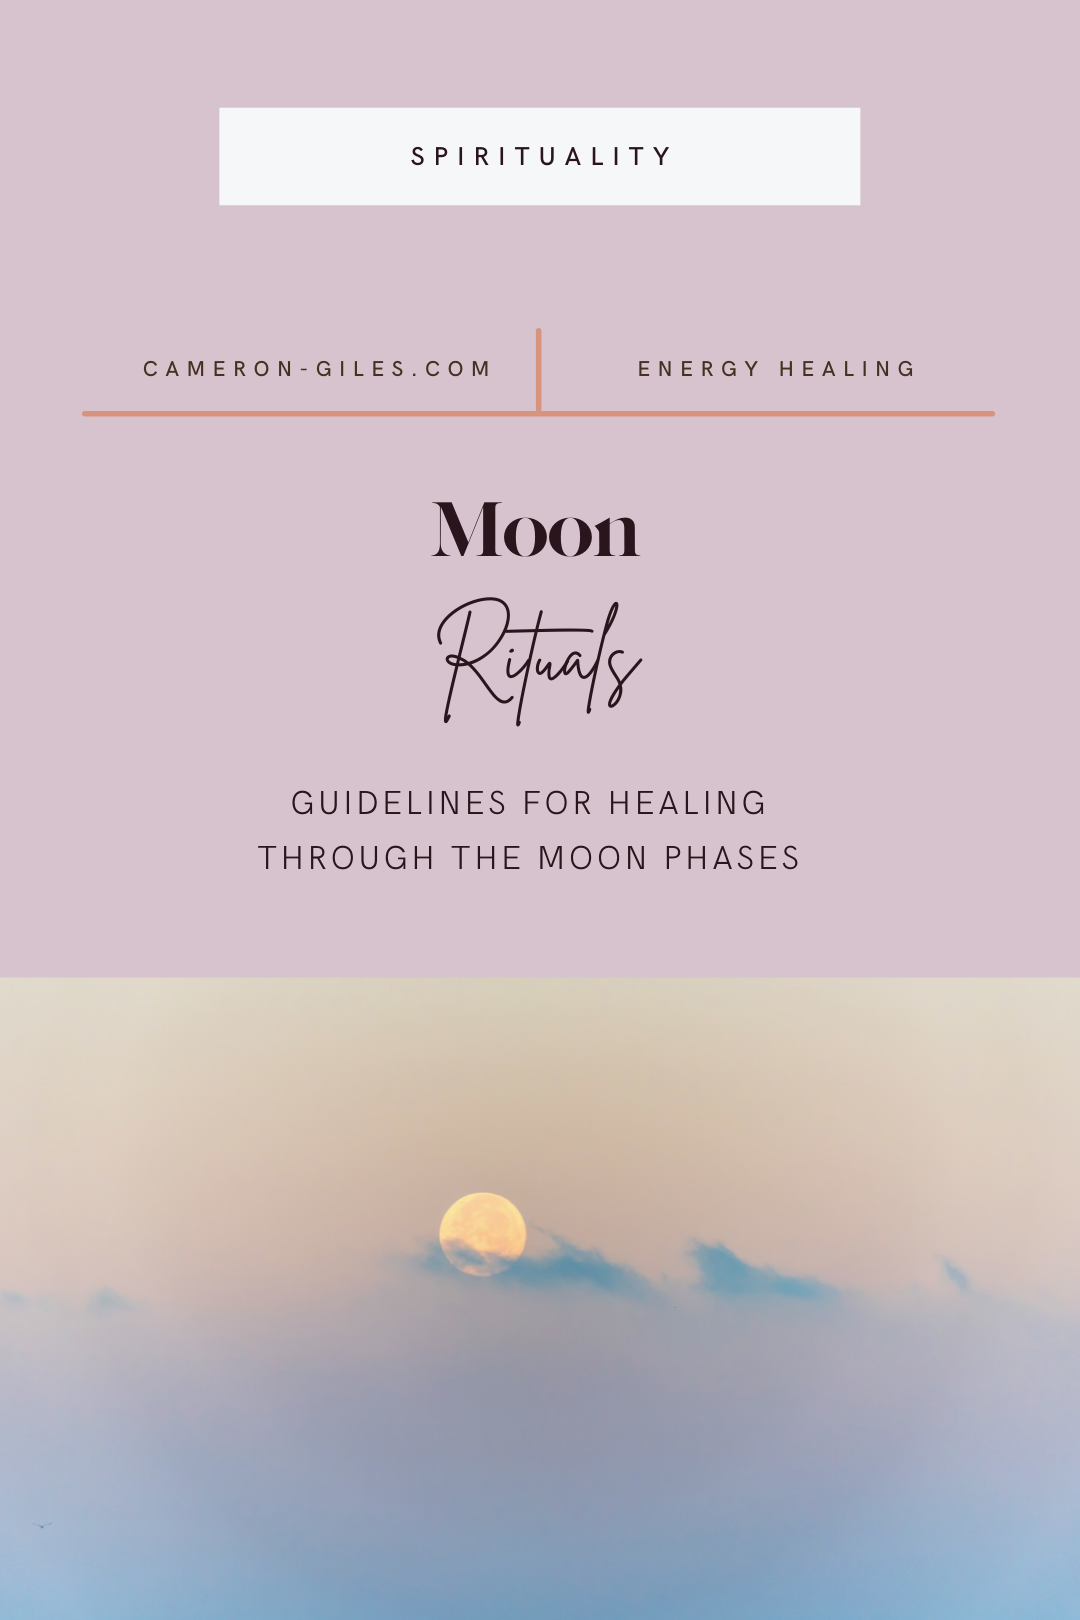 Moon Rituals: Guidelines for healing through the moon phases